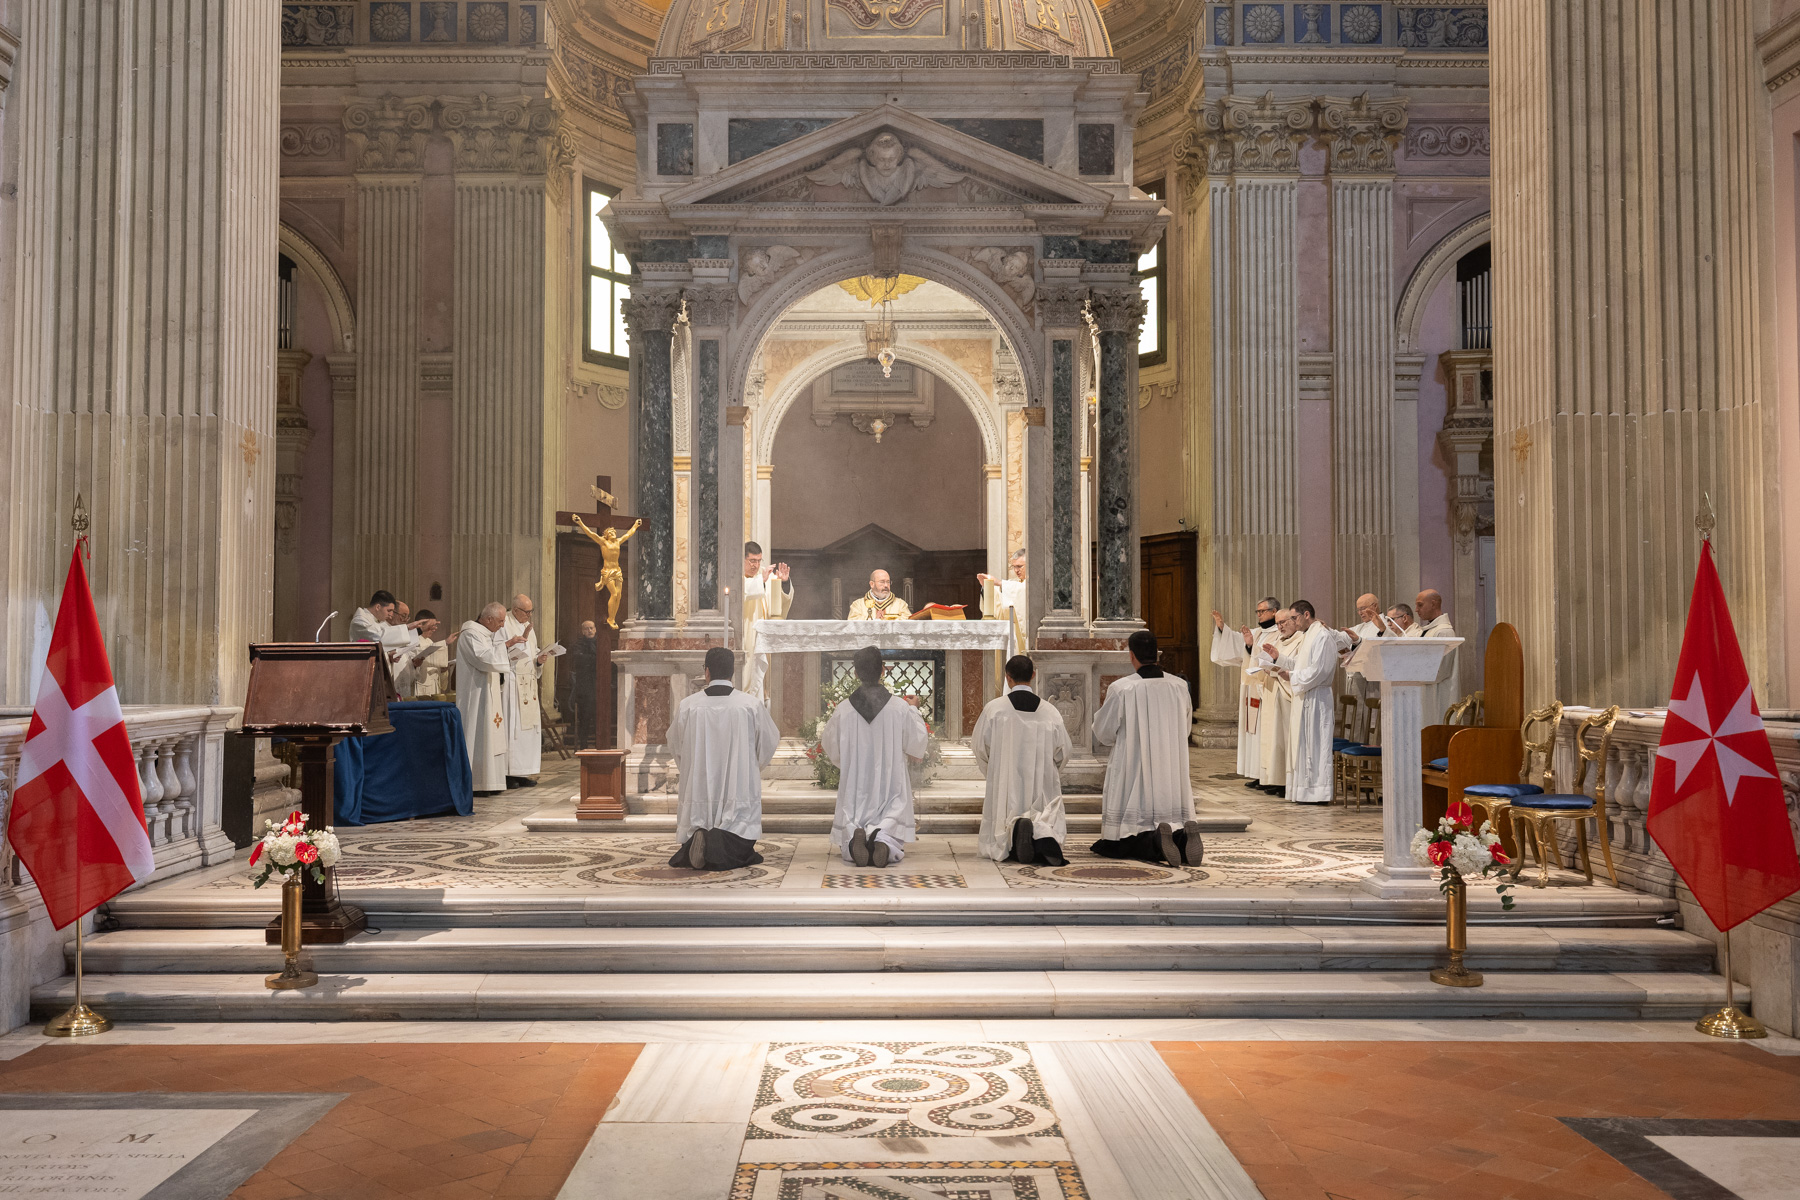 Mass for the Prelate of the Order of Malta: invitation to serve with joy